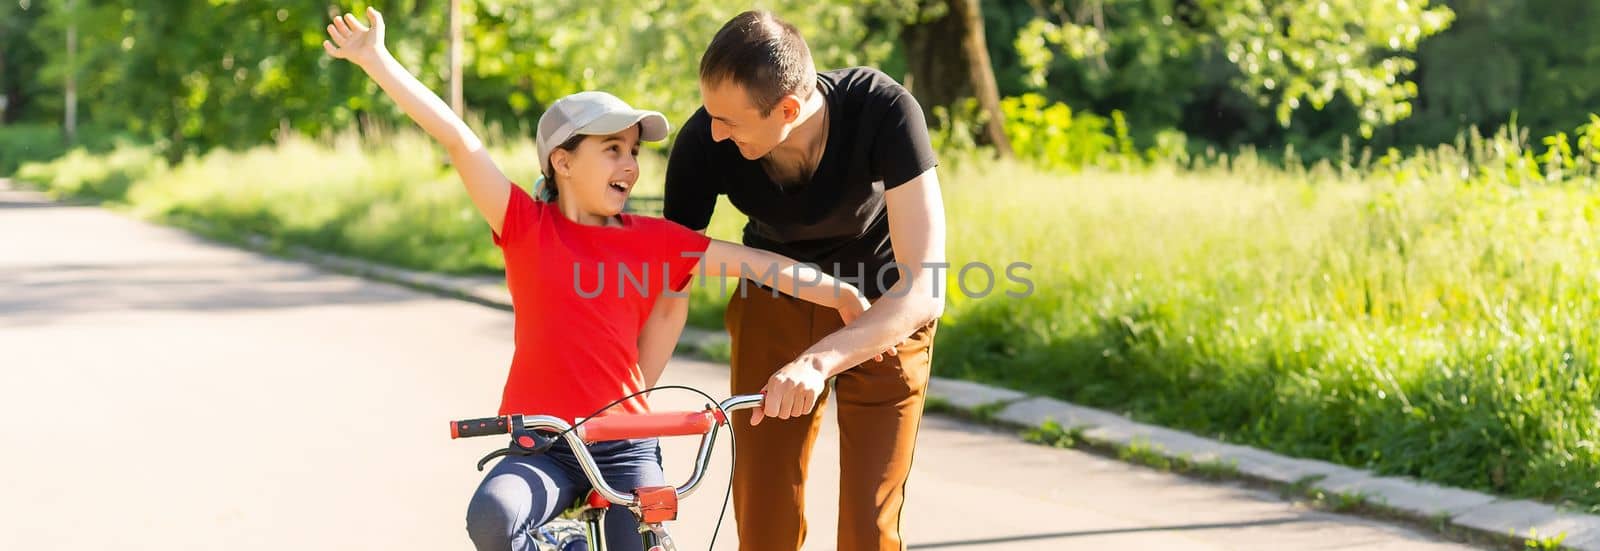 loving father teaching daughter to ride bike by Andelov13